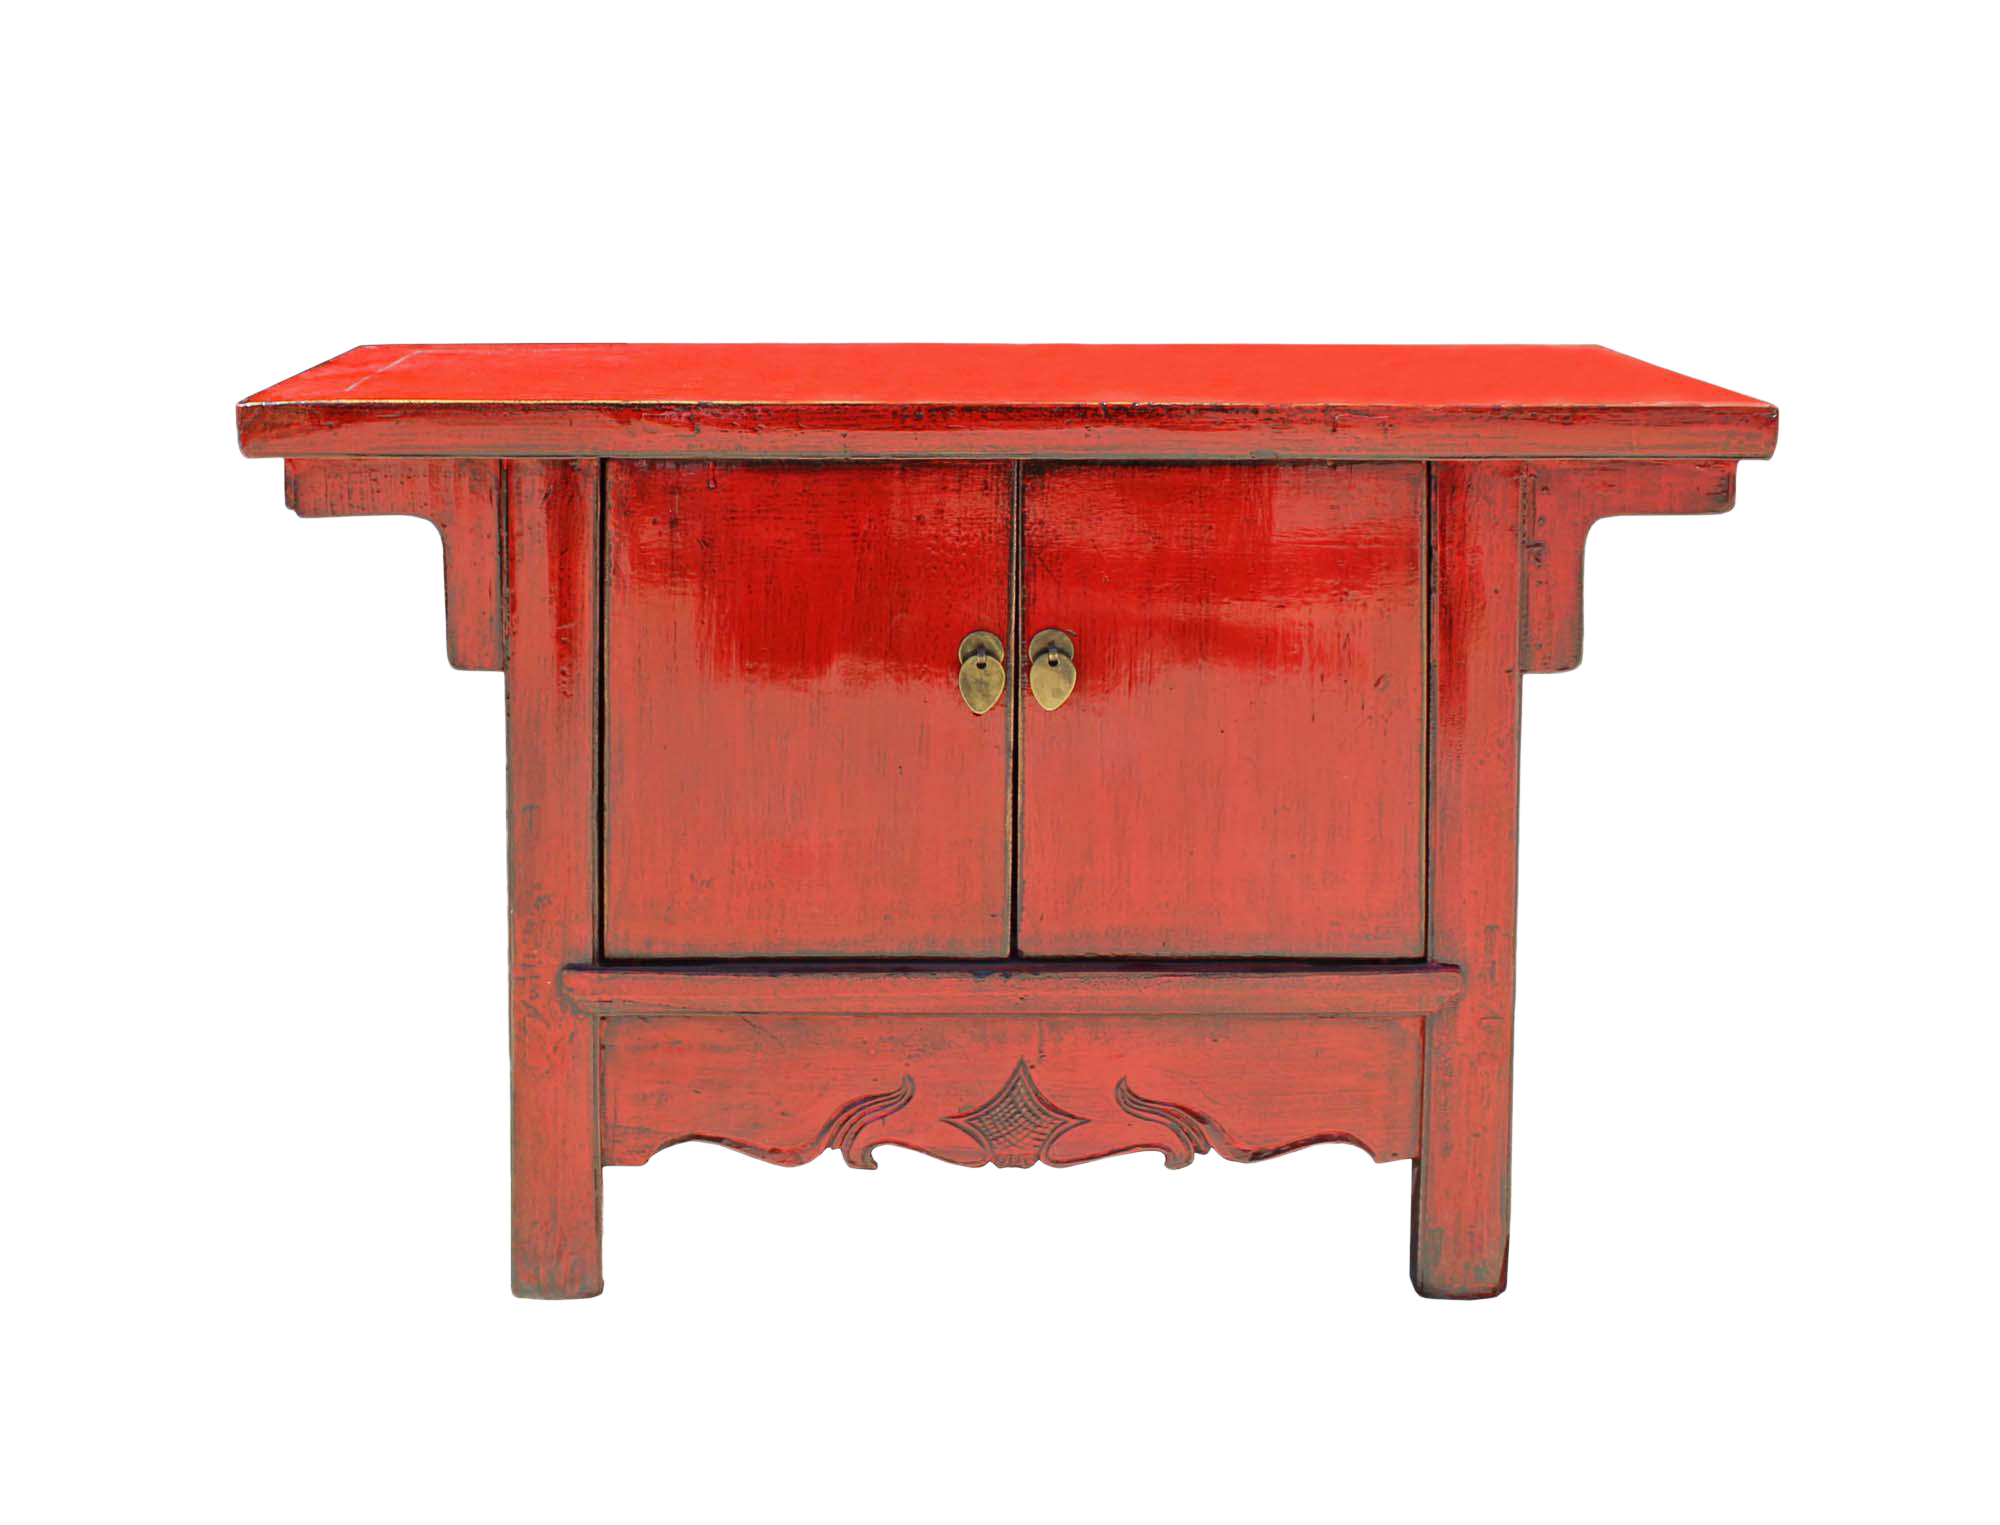 bank red door media knobs target console vintage painting entryway ideas modern accent table black painted design kong fil deer chrome pulls storage drawers and furniture shoe